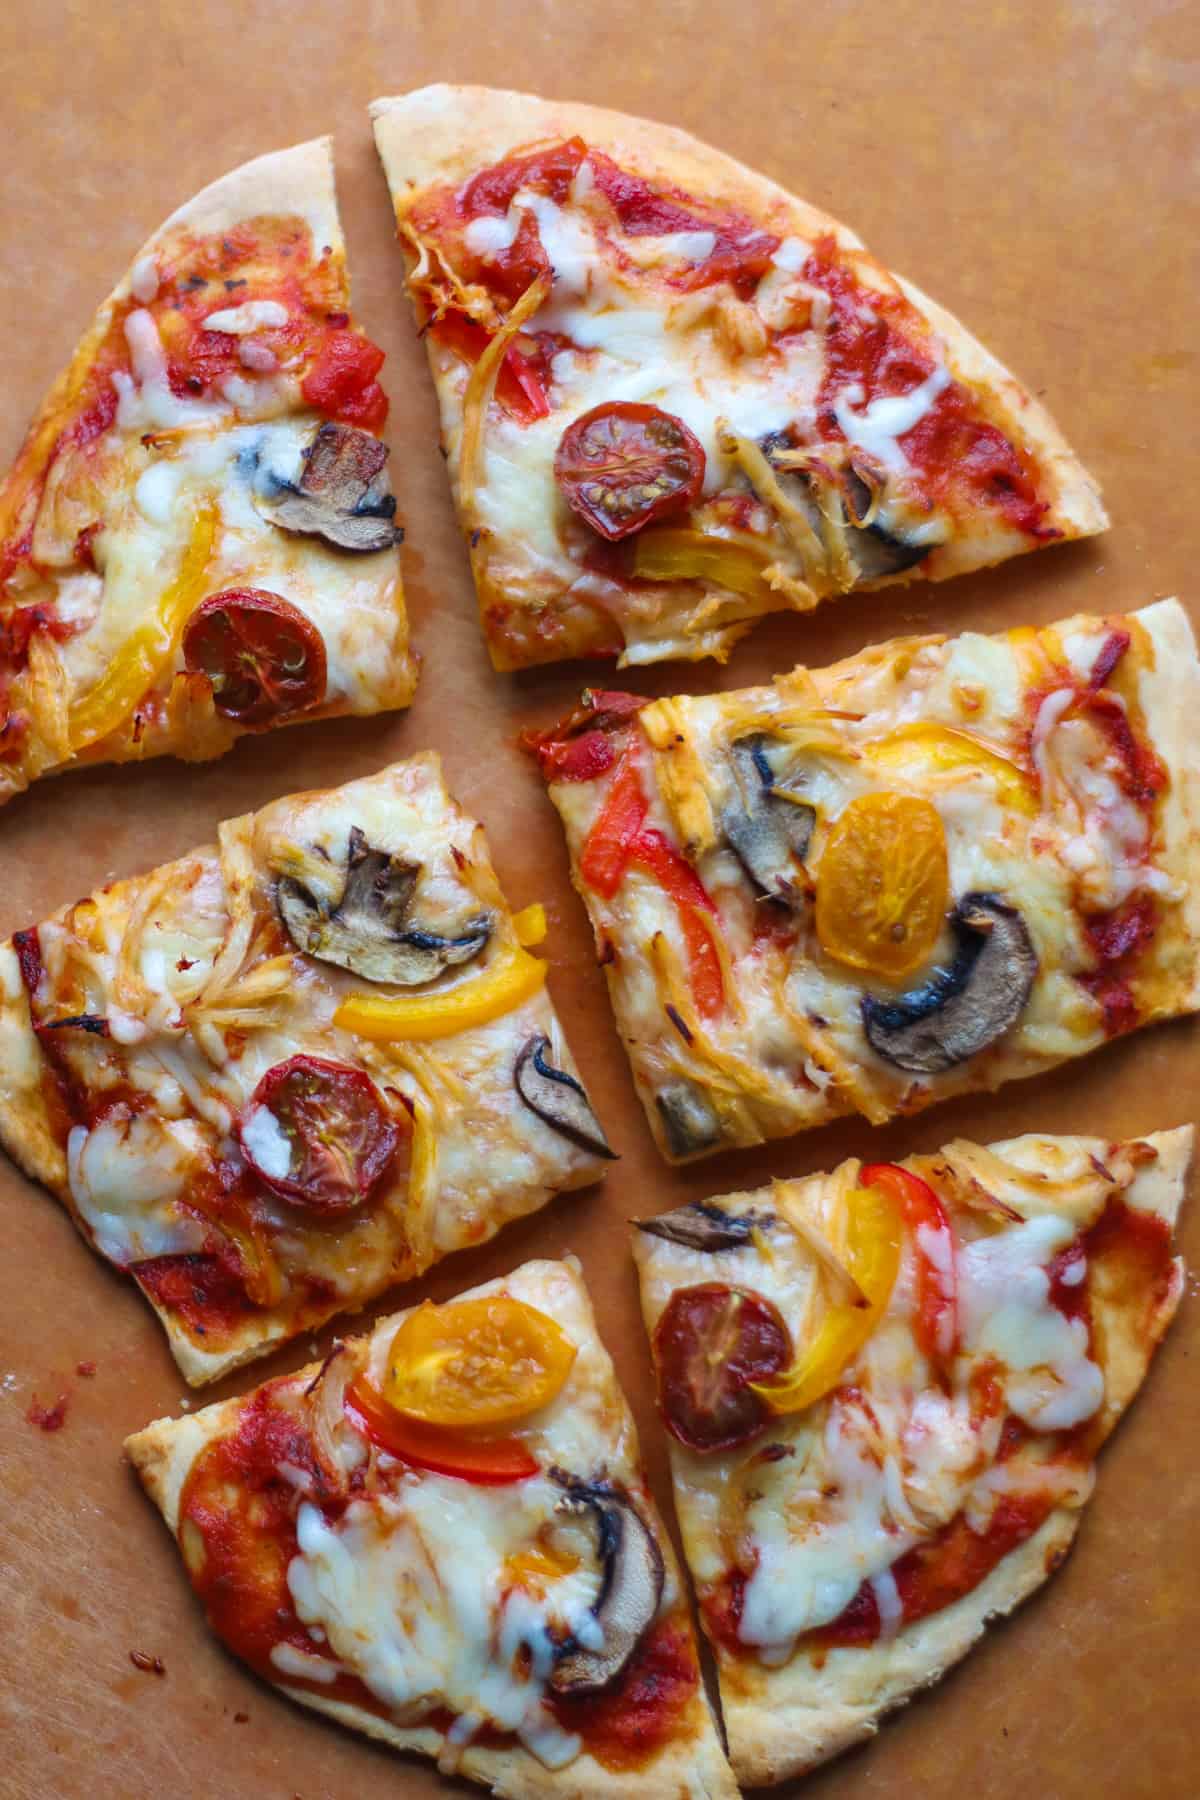 Baked protein pizza sliced into 6 pieces.